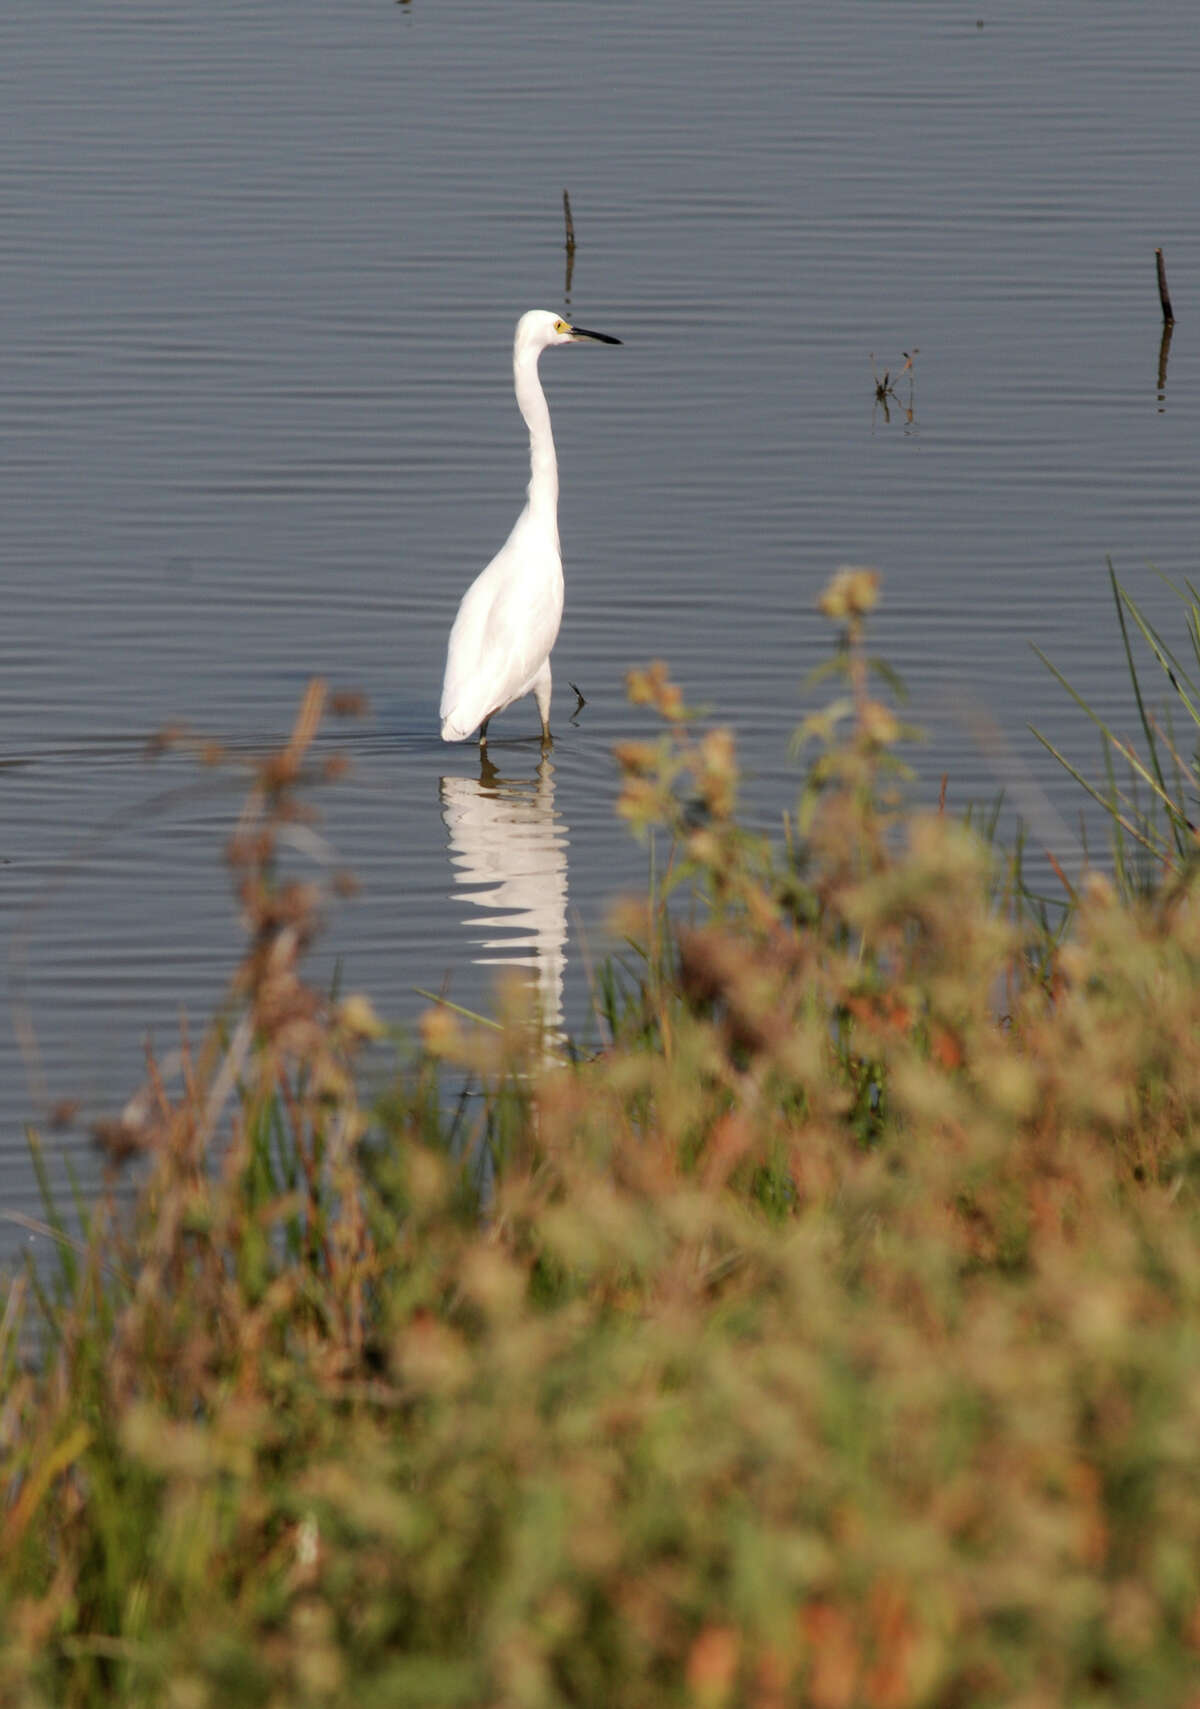 A snowy egret works the waters of a 200-acre wetland in the Katy Prairie Conservancy.